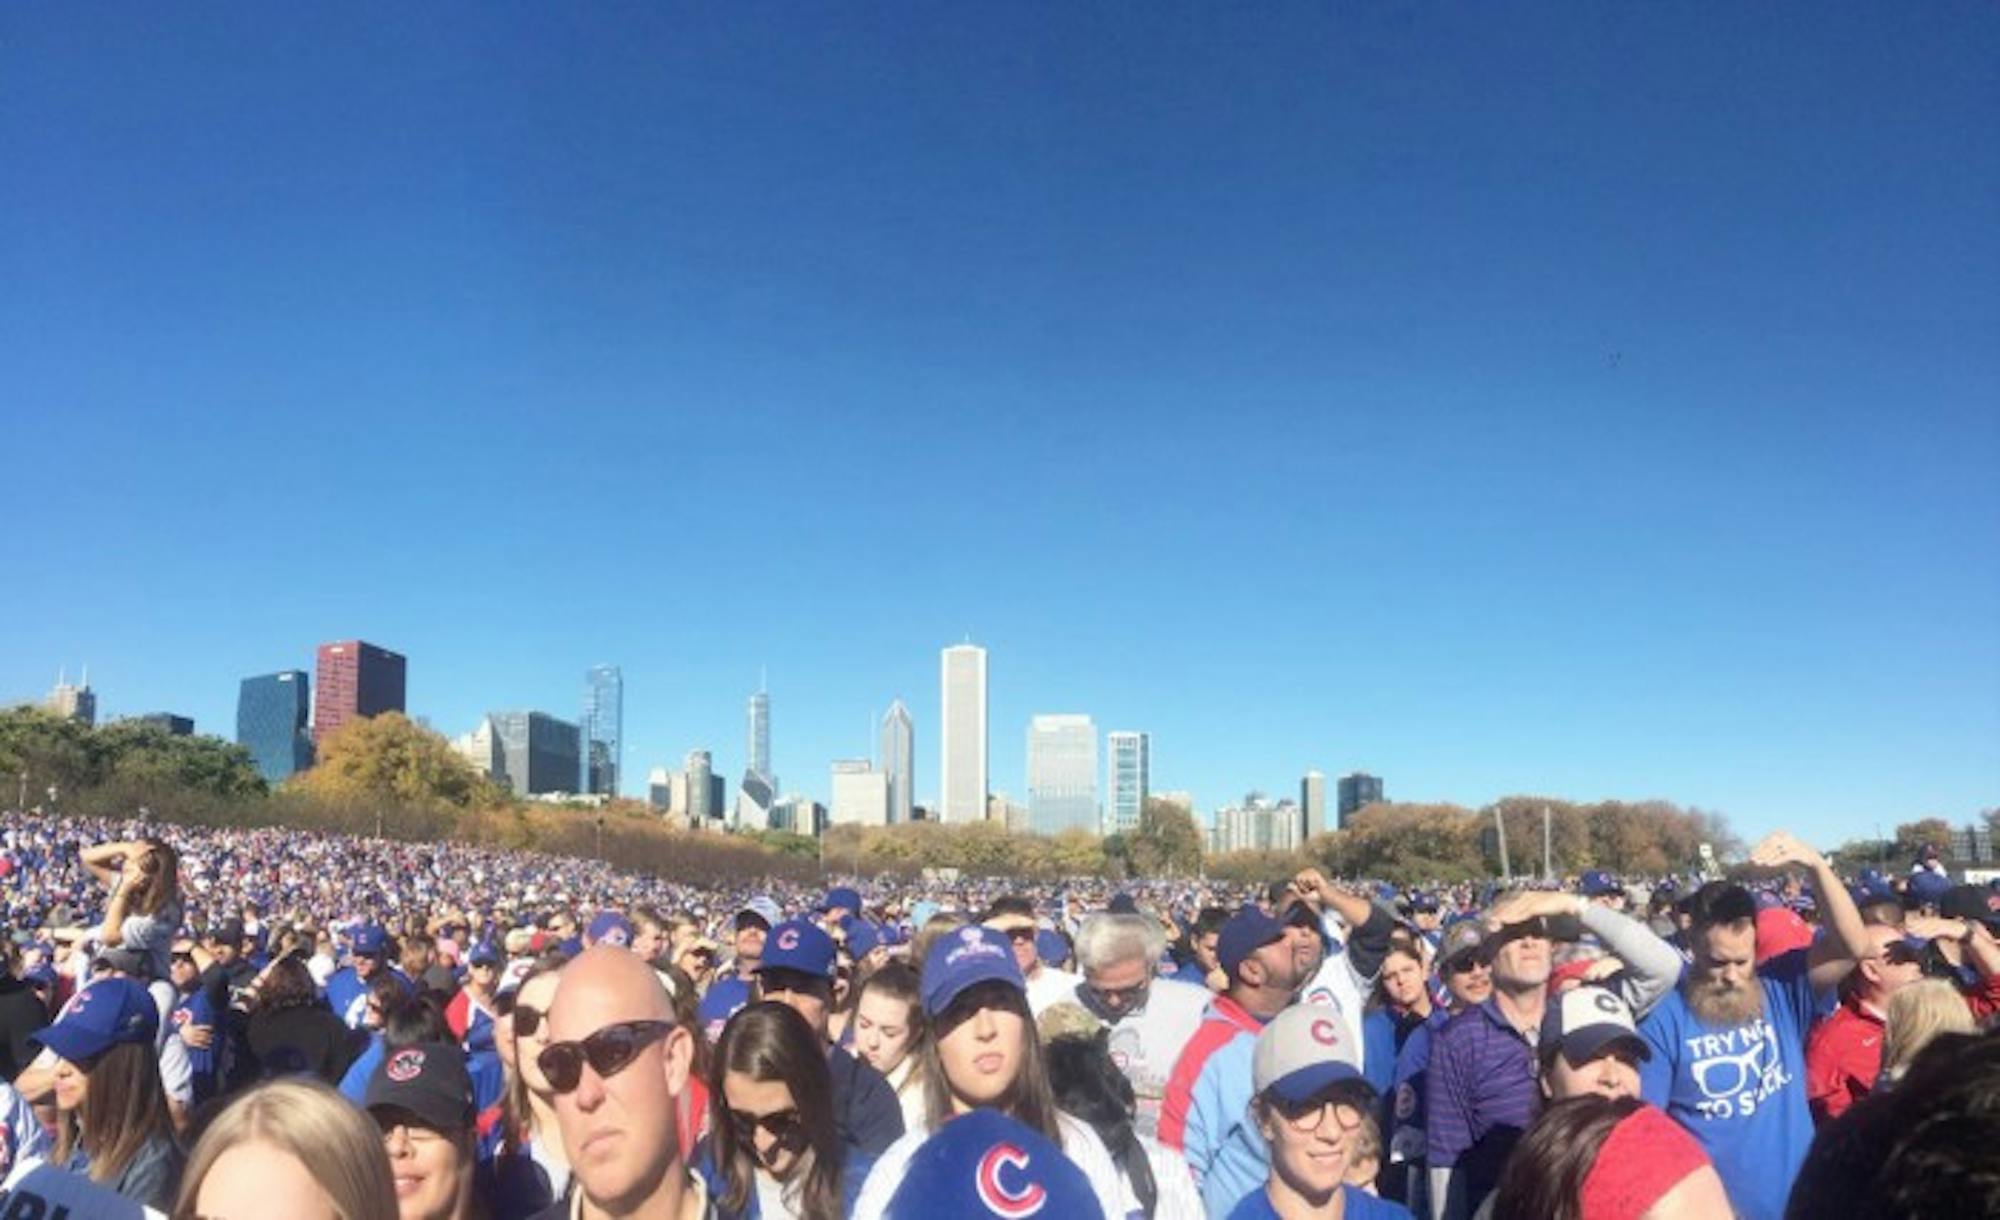 An estimated 5 million people lined the streets of Chicago for the Cubs’ World Series victory parade, making it the seventh-largest gathering of people in human history.